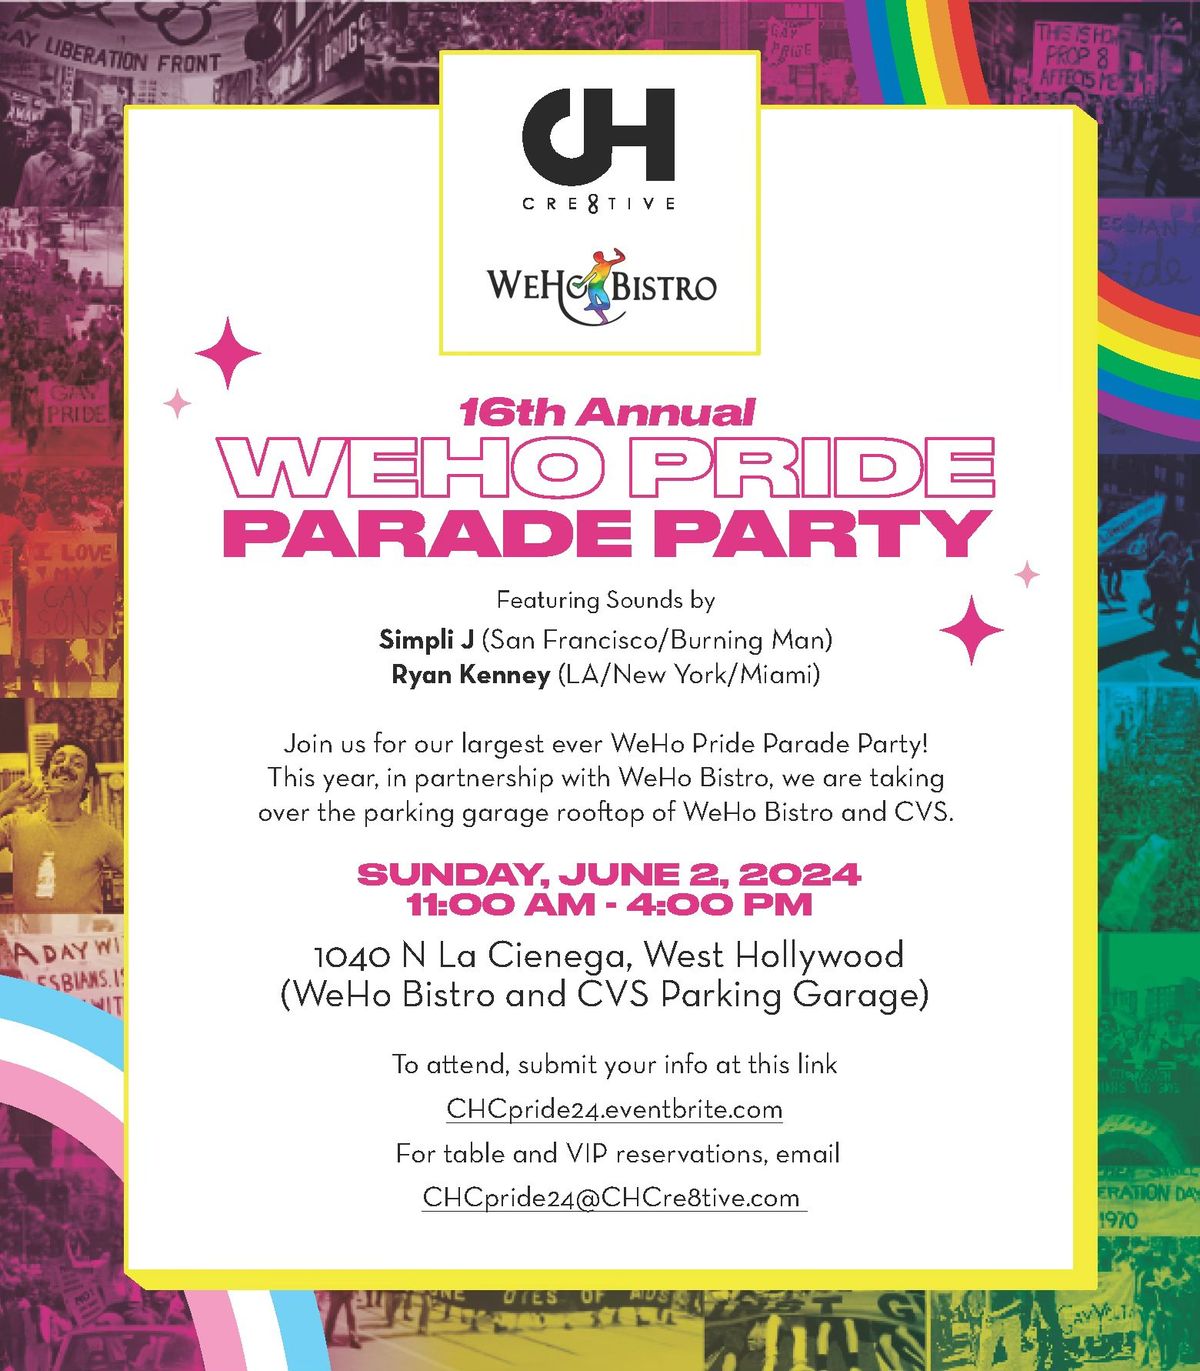 The 16th Annual WeHo Pride Rooftop Party